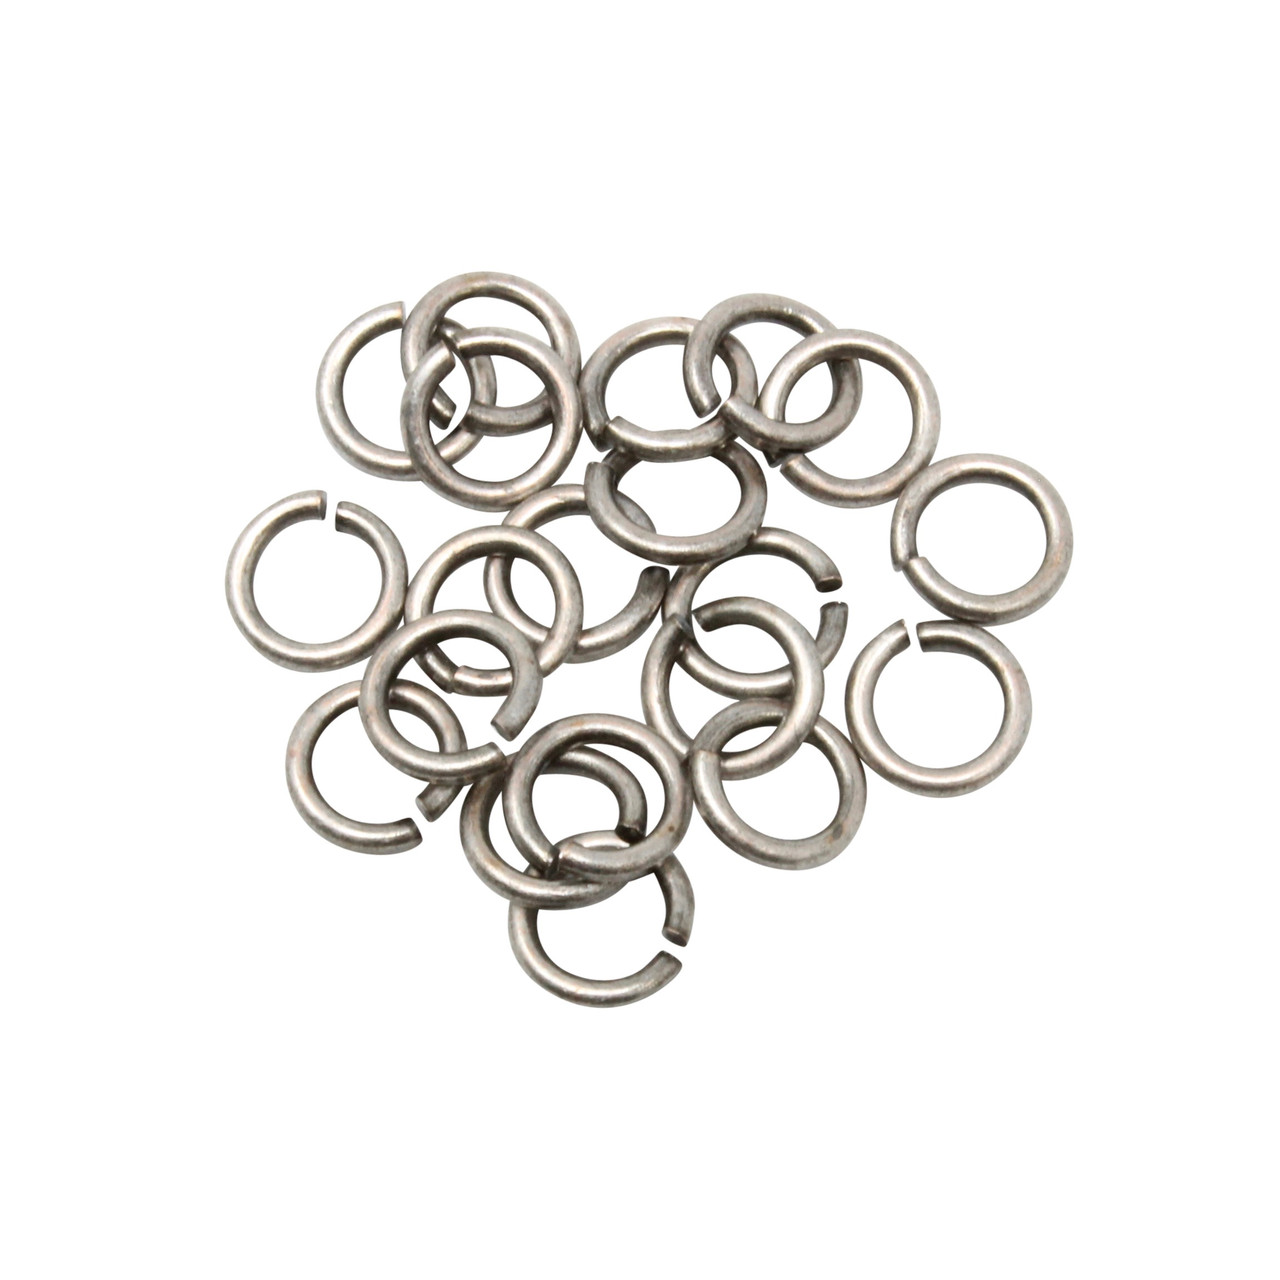 6mm/18g Jump Rings- Antique Silver –